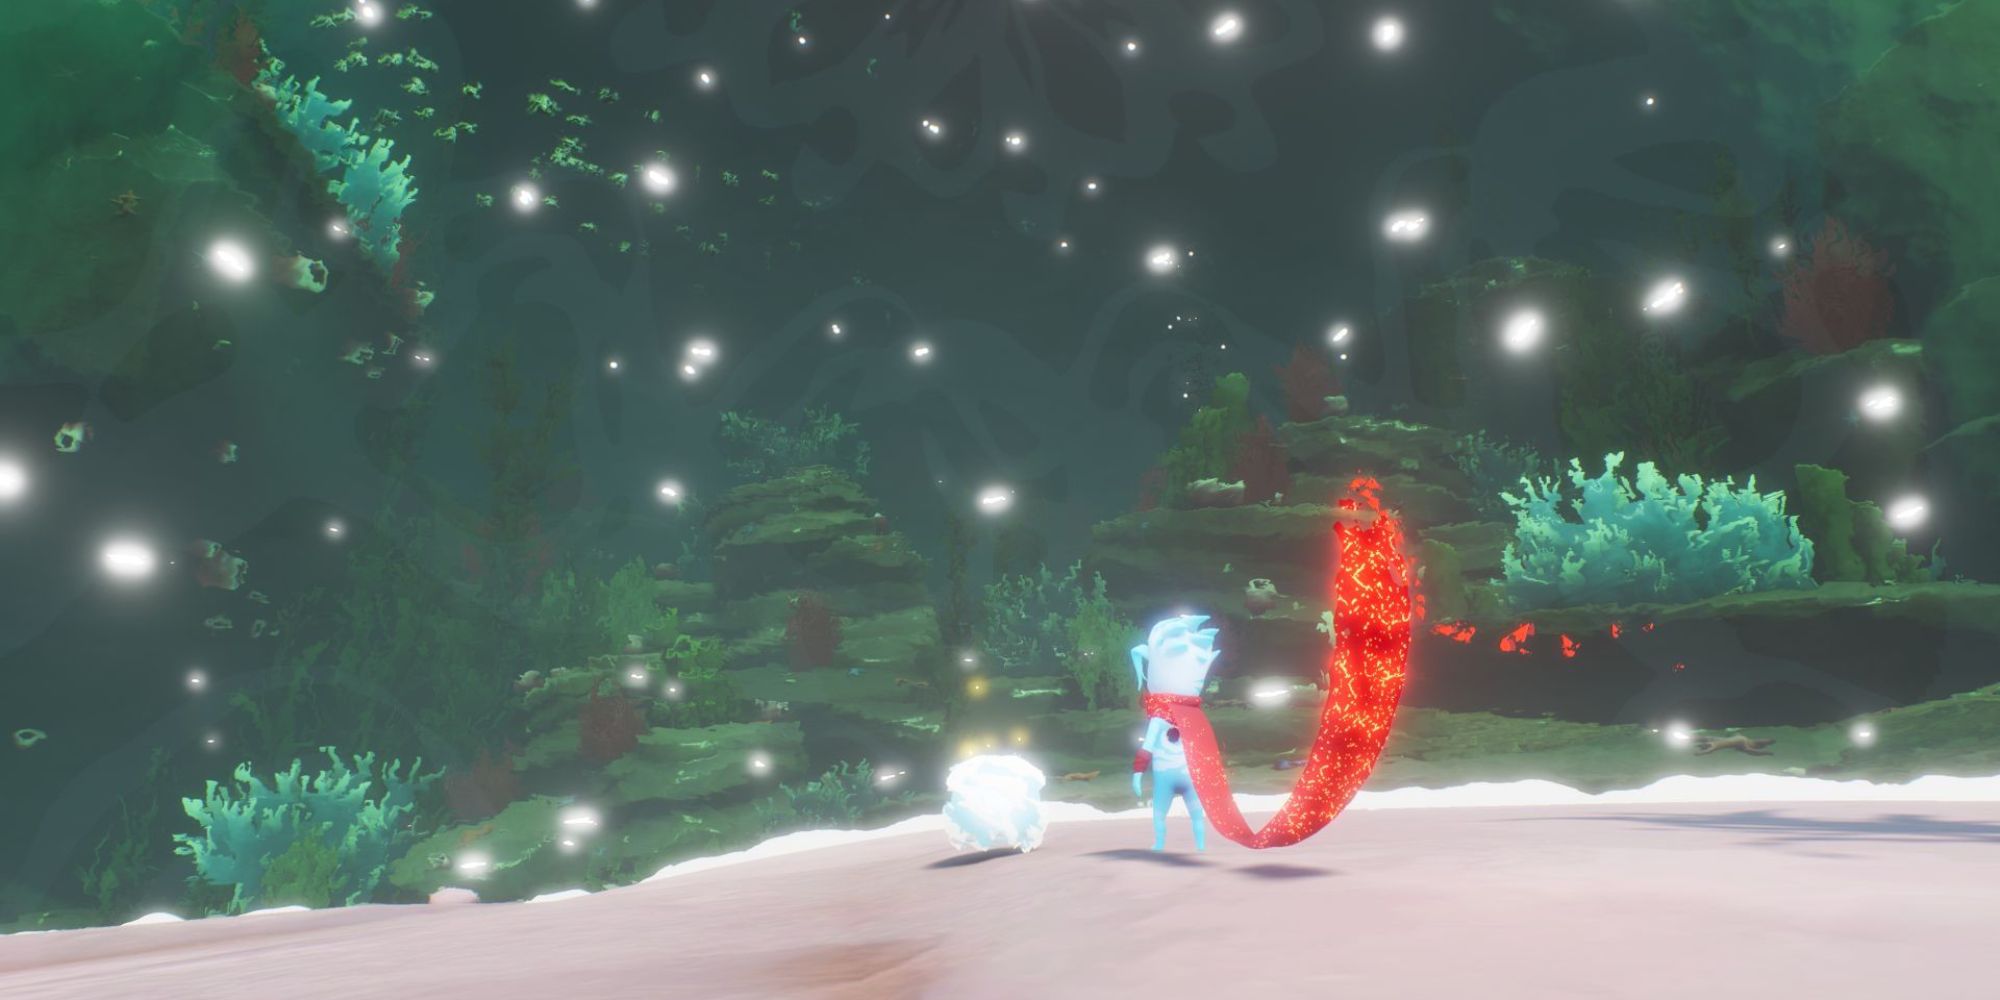 Scarf Review Stunning Visuals Tangled In Confusing Storytelling